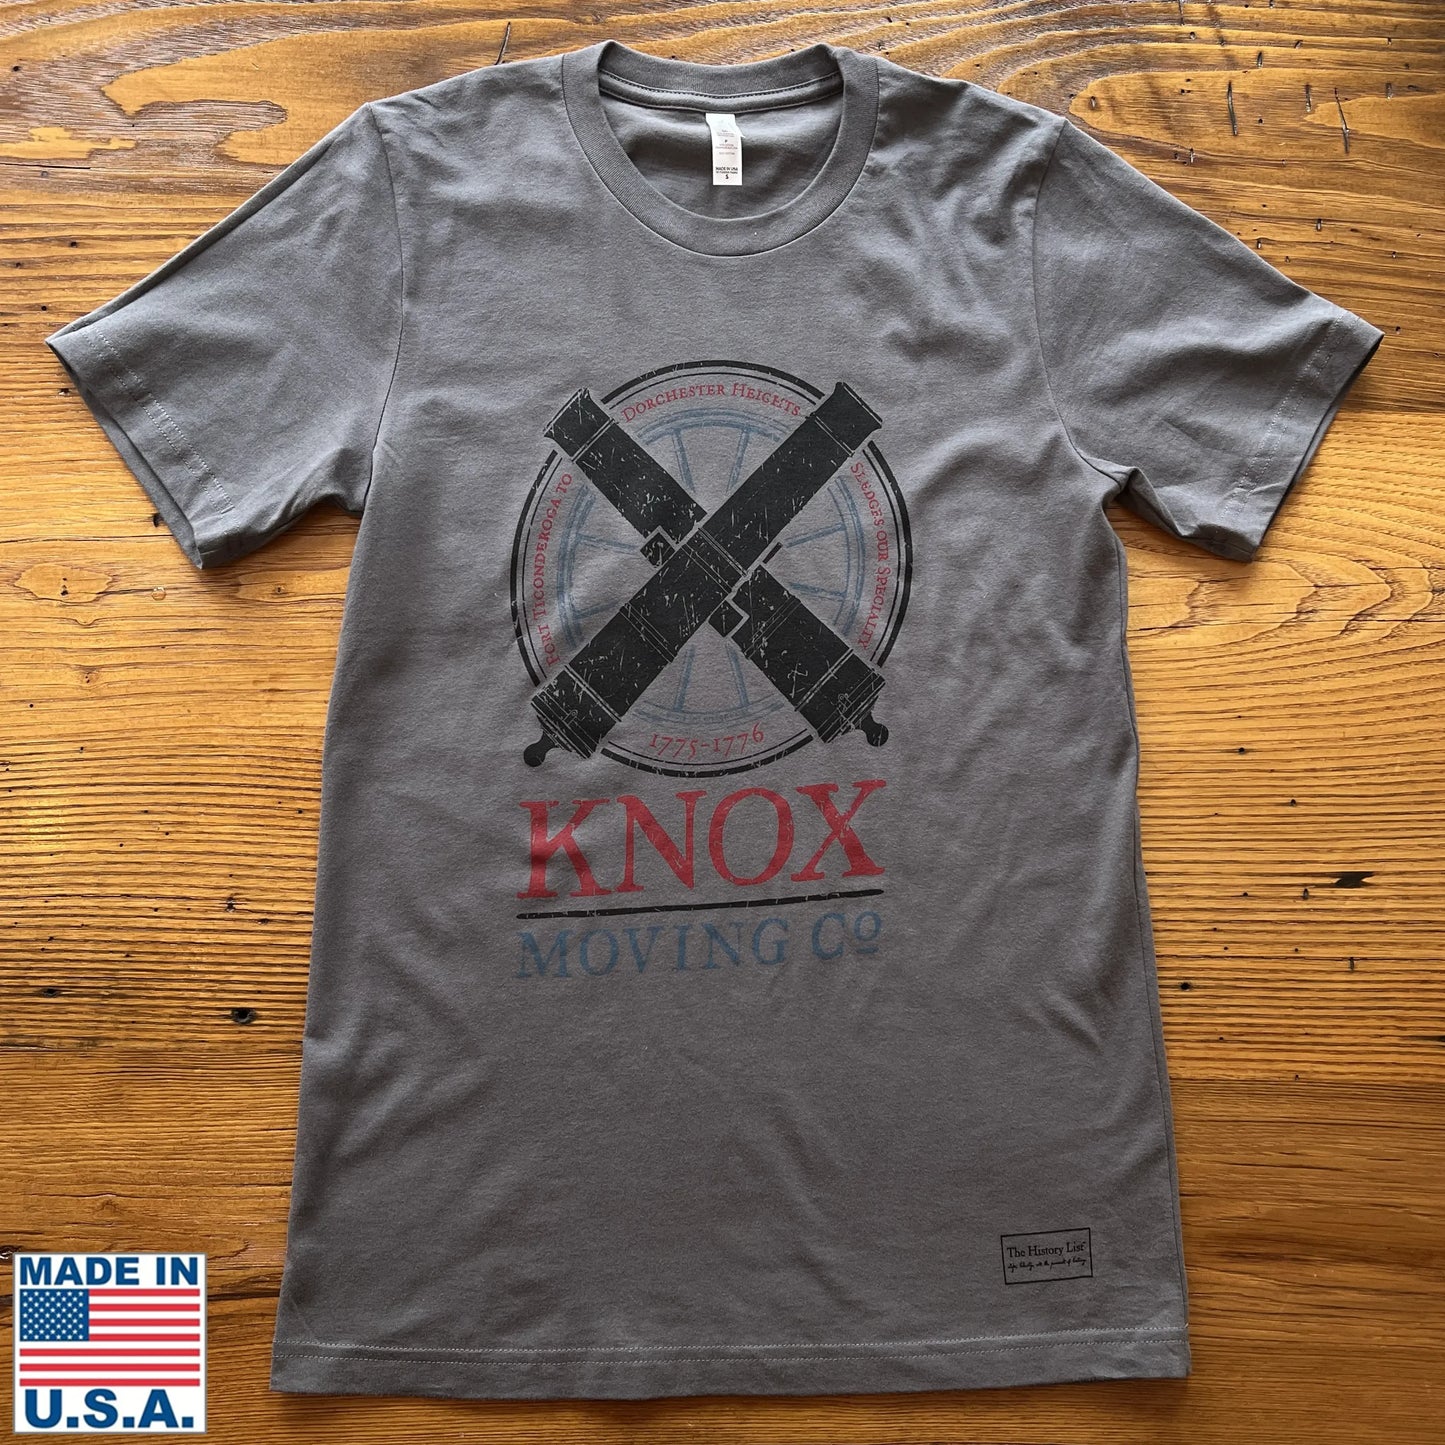 Made in USA "Knox Moving Co." Shirt in Grey from The History List store